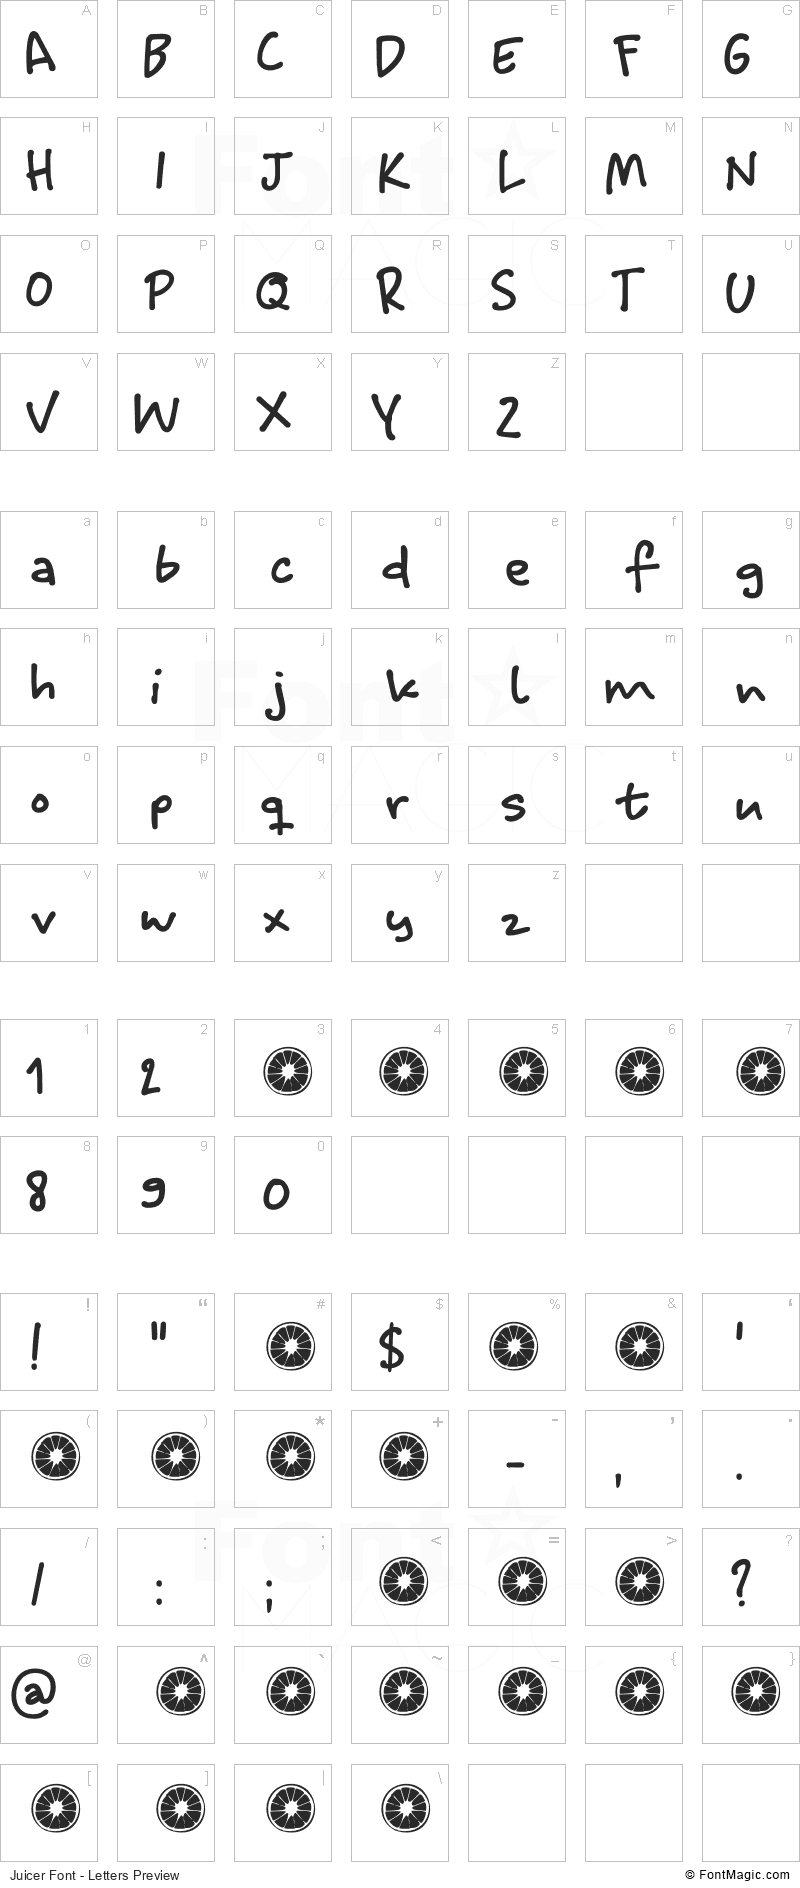 Juicer Font - All Latters Preview Chart